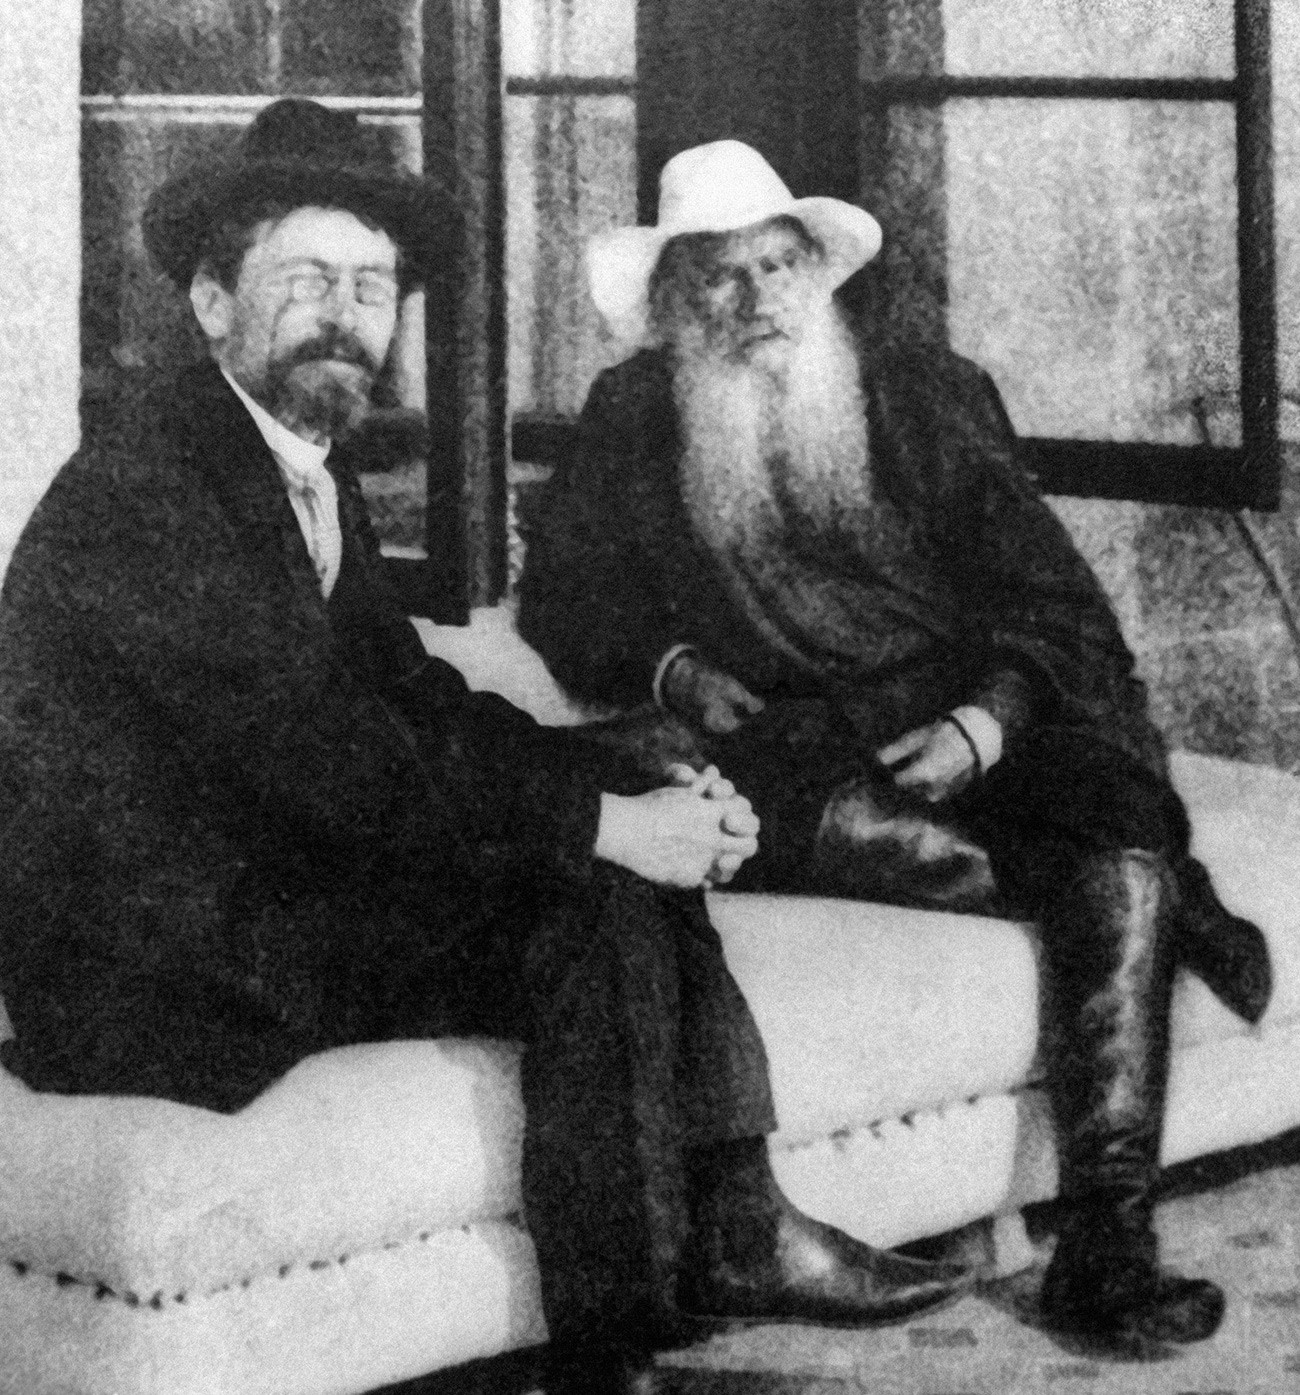 Chekhov and Tolstoy in Crimea. They actually were on good terms.